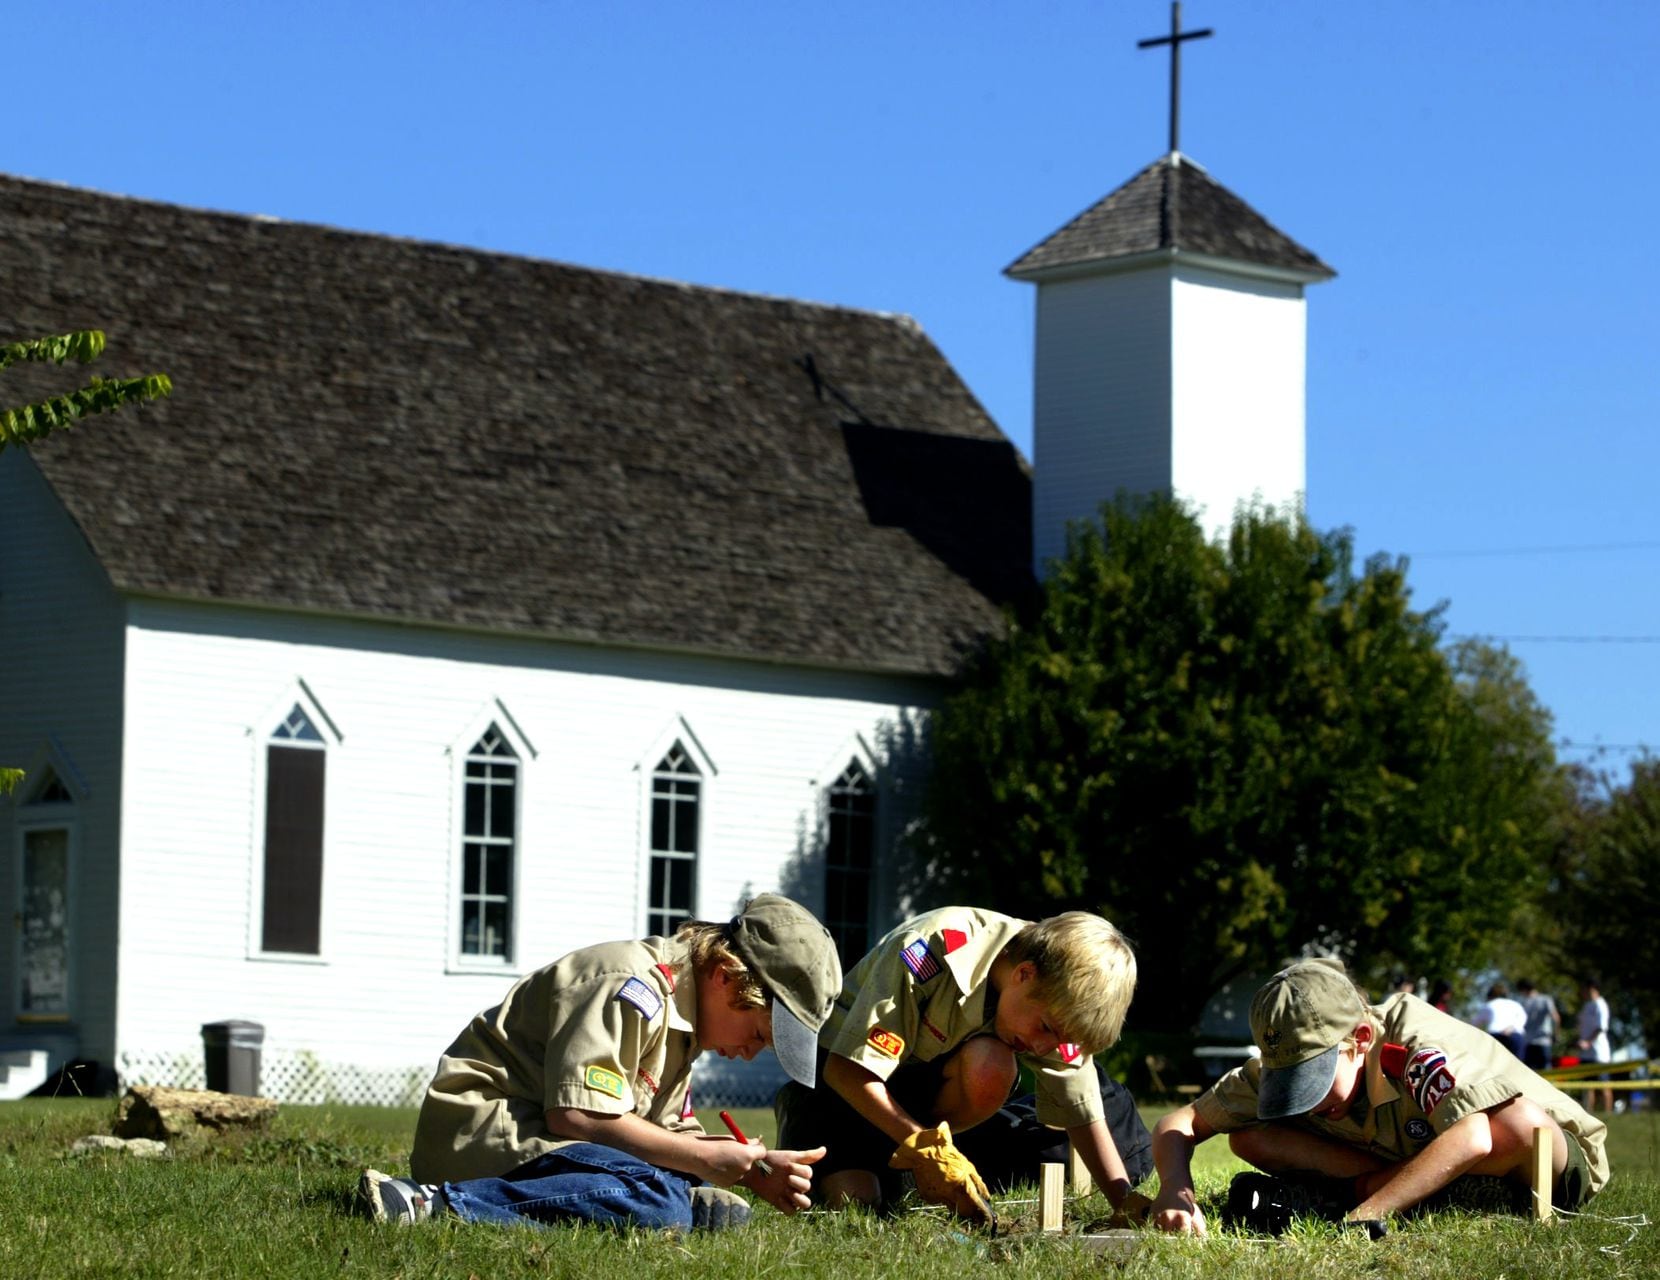 Members of Boy Scout Troop 714 dig for artifacts at the former Frankford town site at 17405 Muirfield Drive located near the intersection of the Dallas North Tollway and Frankford Road. Behind the scouts is the Church of the Holy Communion and Episcopal church. (Oct. 18, 2003)